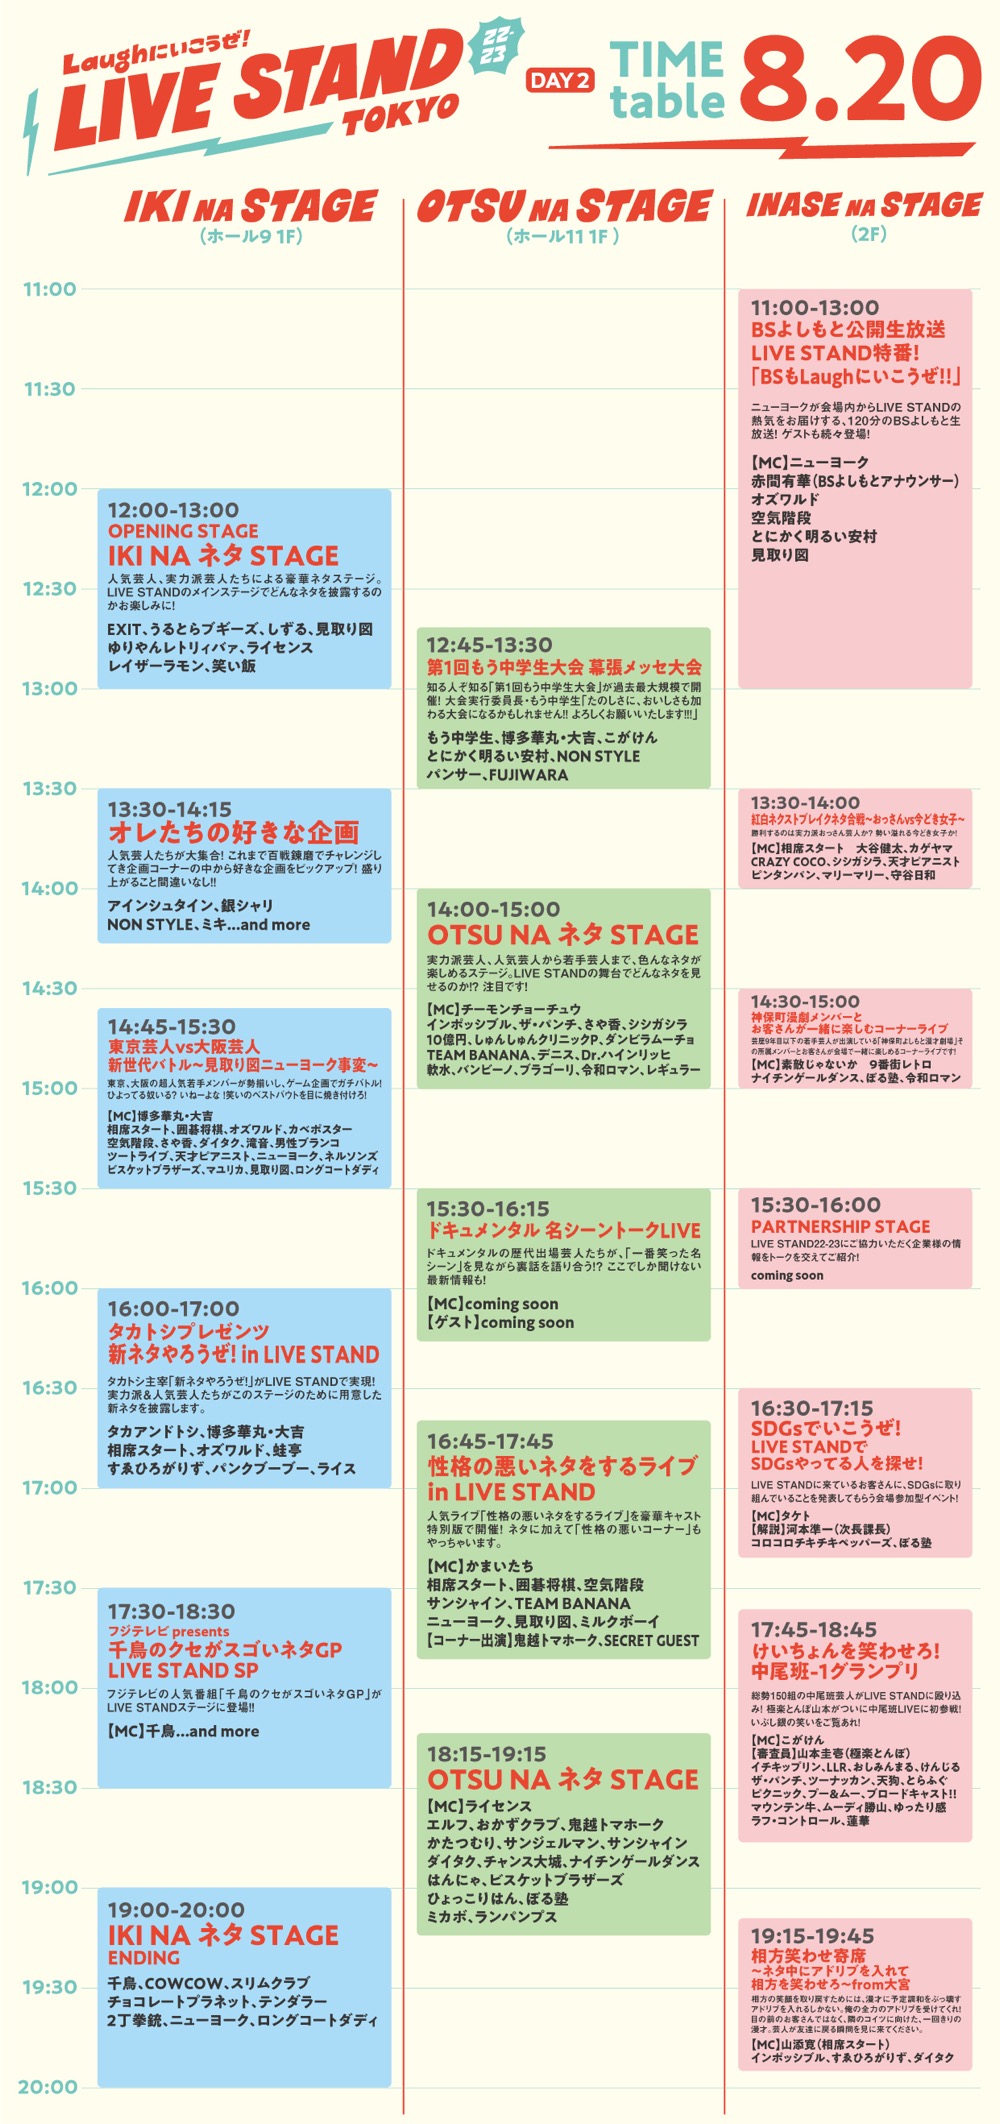 OWV＆OCTPATH、お笑いフェス『LIVE STAND 22-23 TOKYO』に参戦決定 - 画像一覧（2/5）